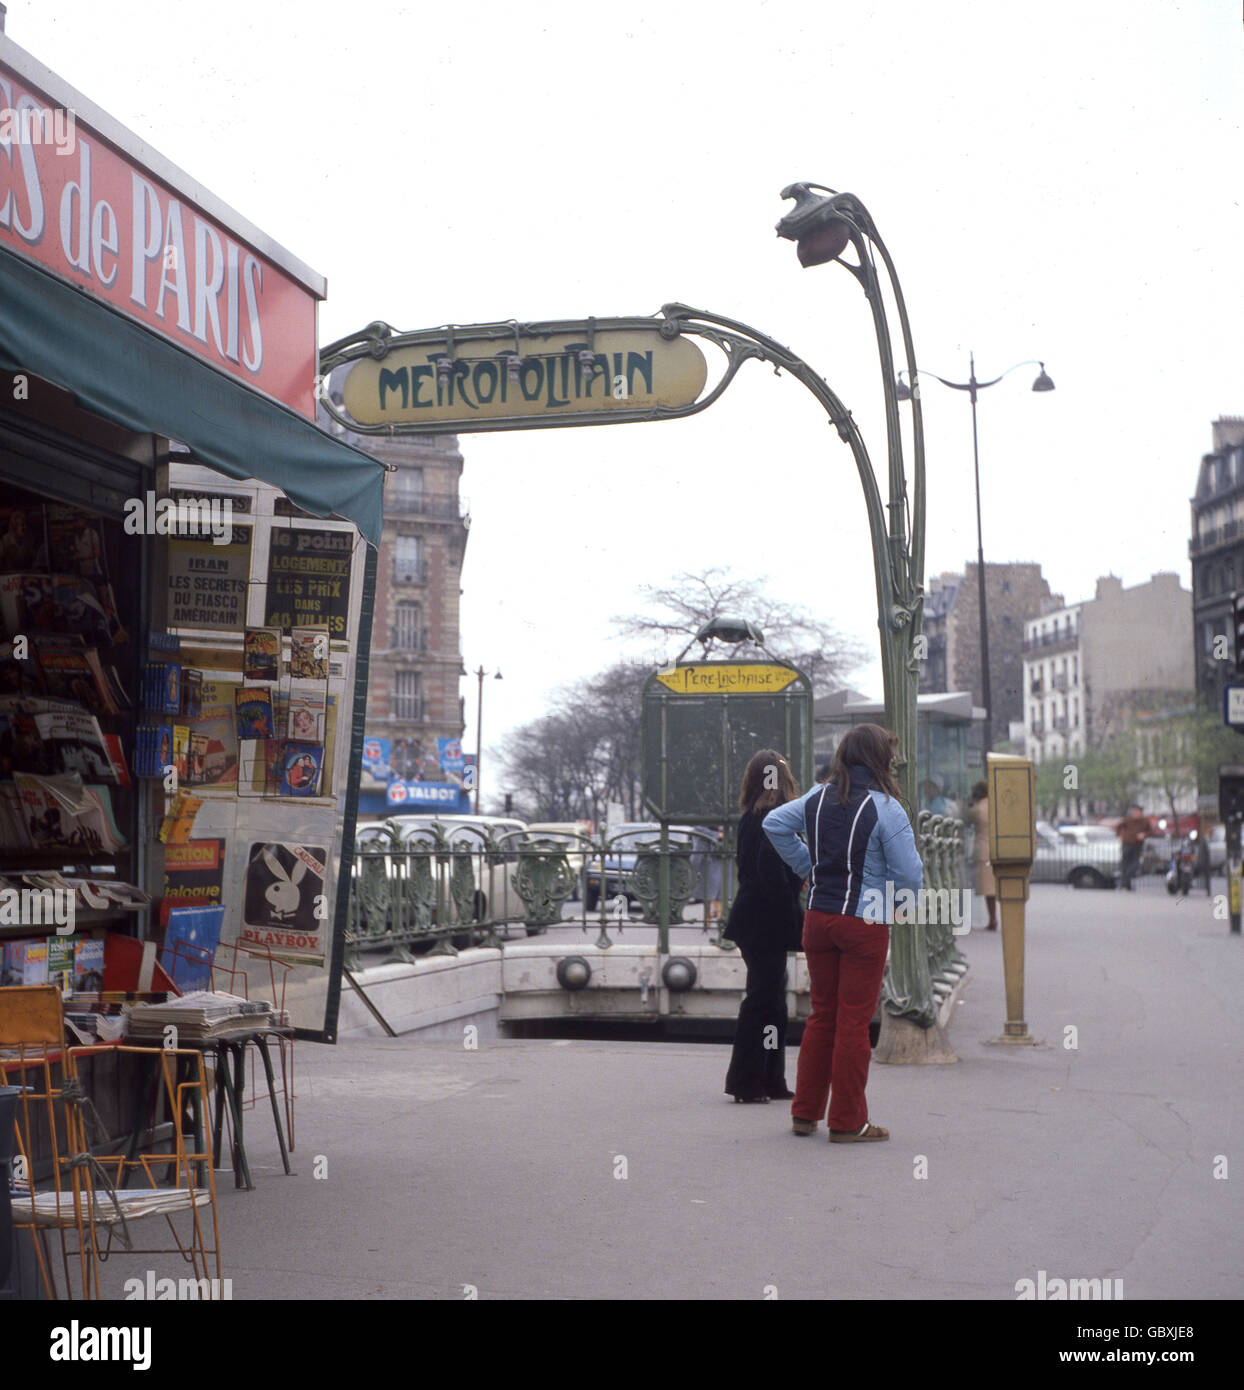 1970s, picture shows an entrance to a Paris metro station with it's distinctive signage and a newspaper stand, Paris, France. Stock Photo